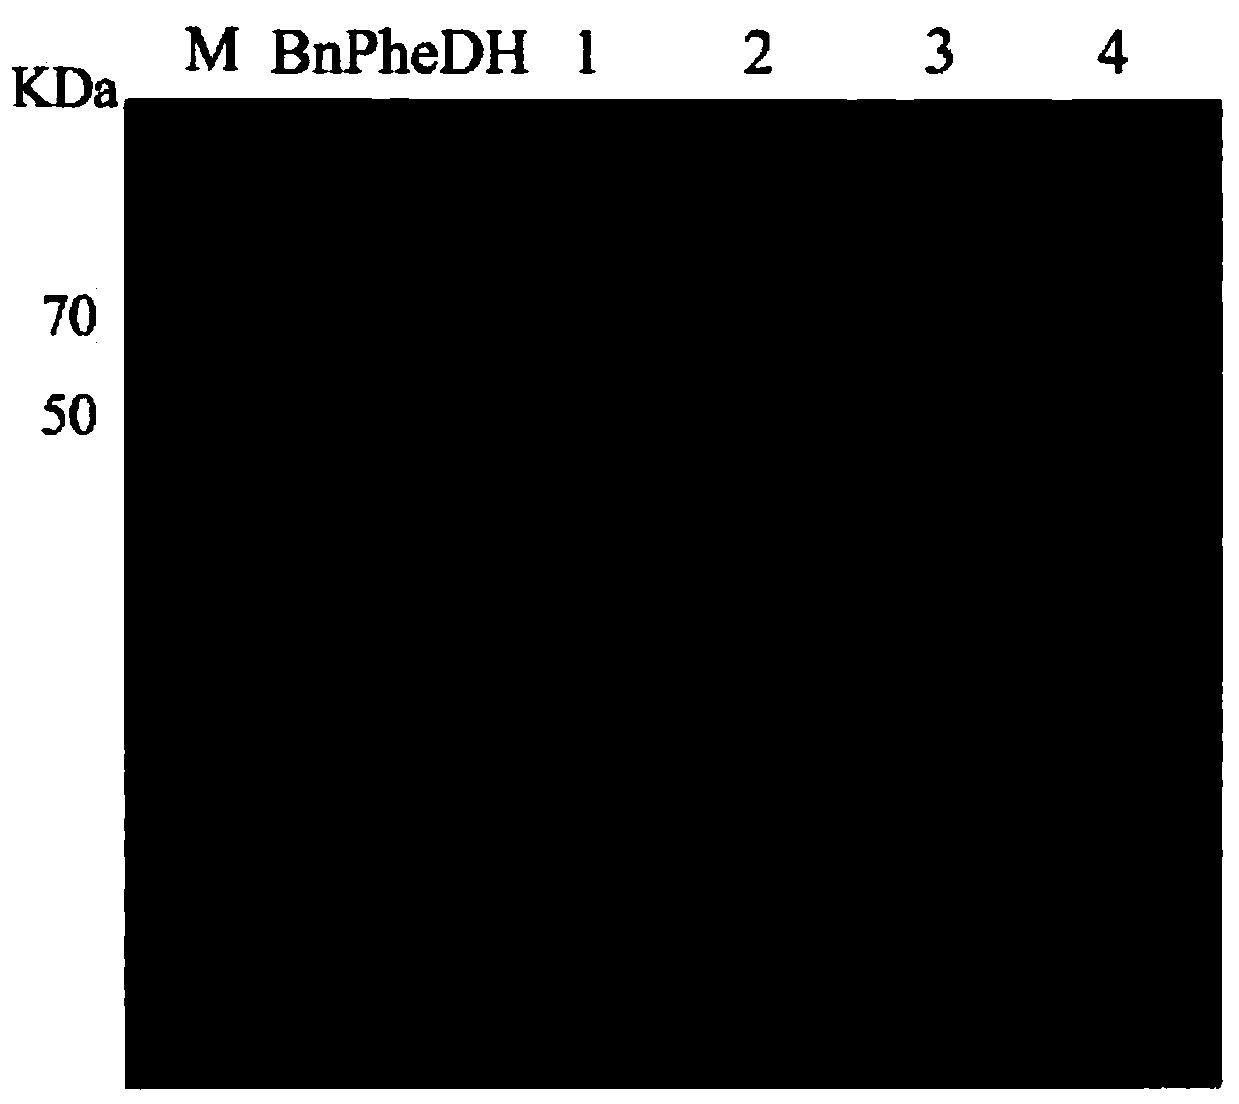 Phenylalanine dehydrogenase for catalytic preparation of non-natural amino acid and application of phenylalanine dehydrogenase